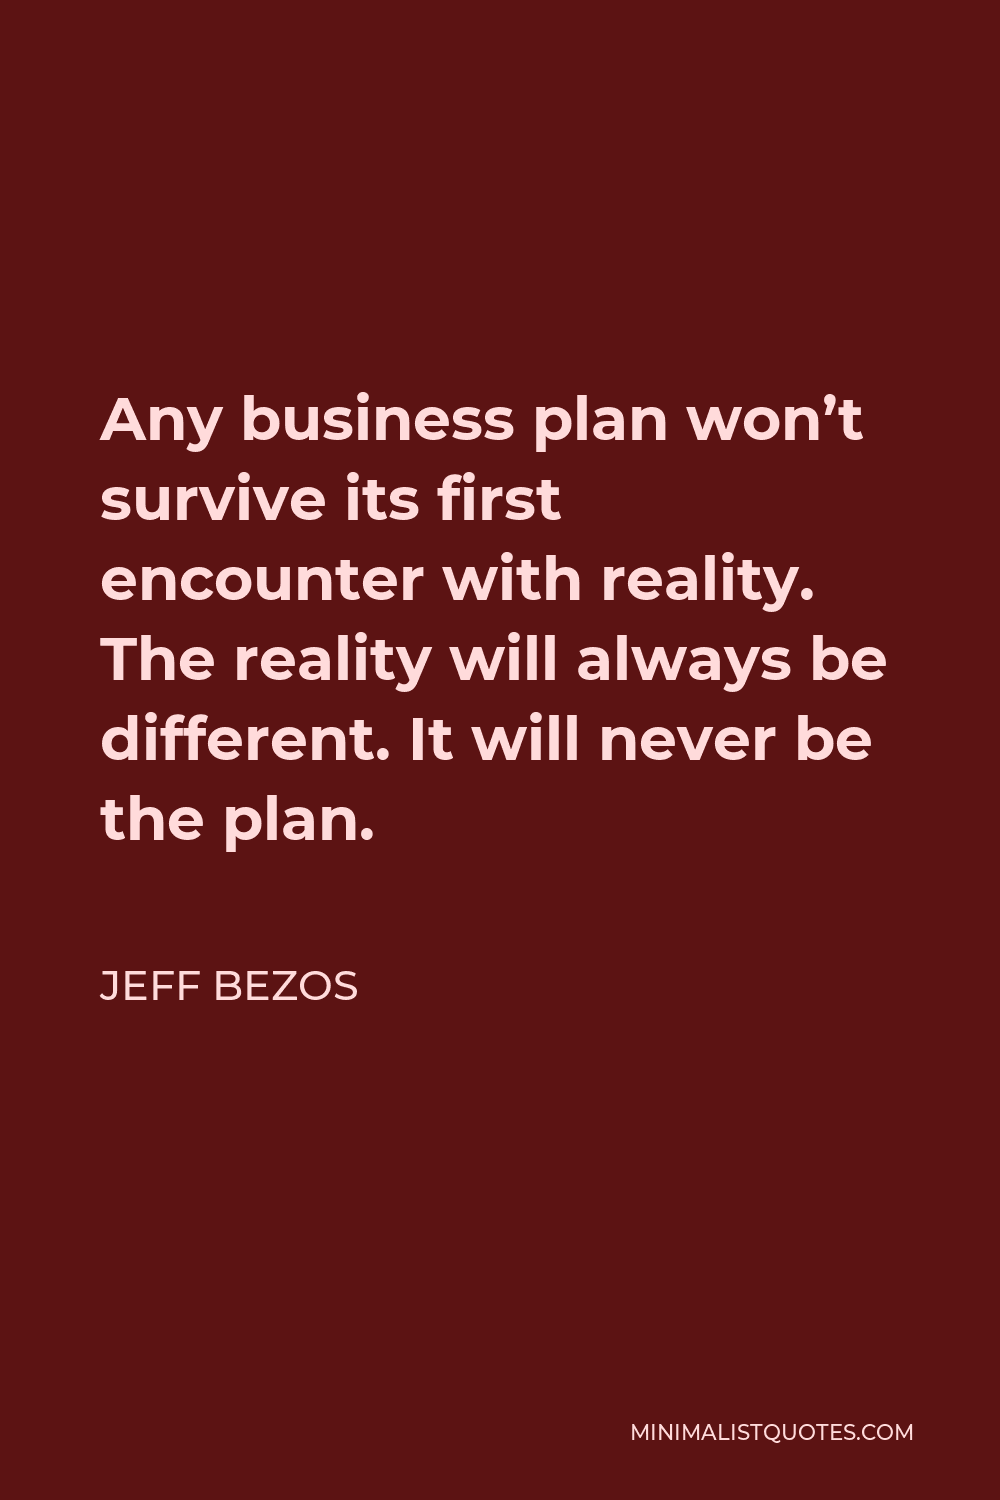 Jeff Bezos Quote - Any business plan won’t survive its first encounter with reality. The reality will always be different. It will never be the plan.